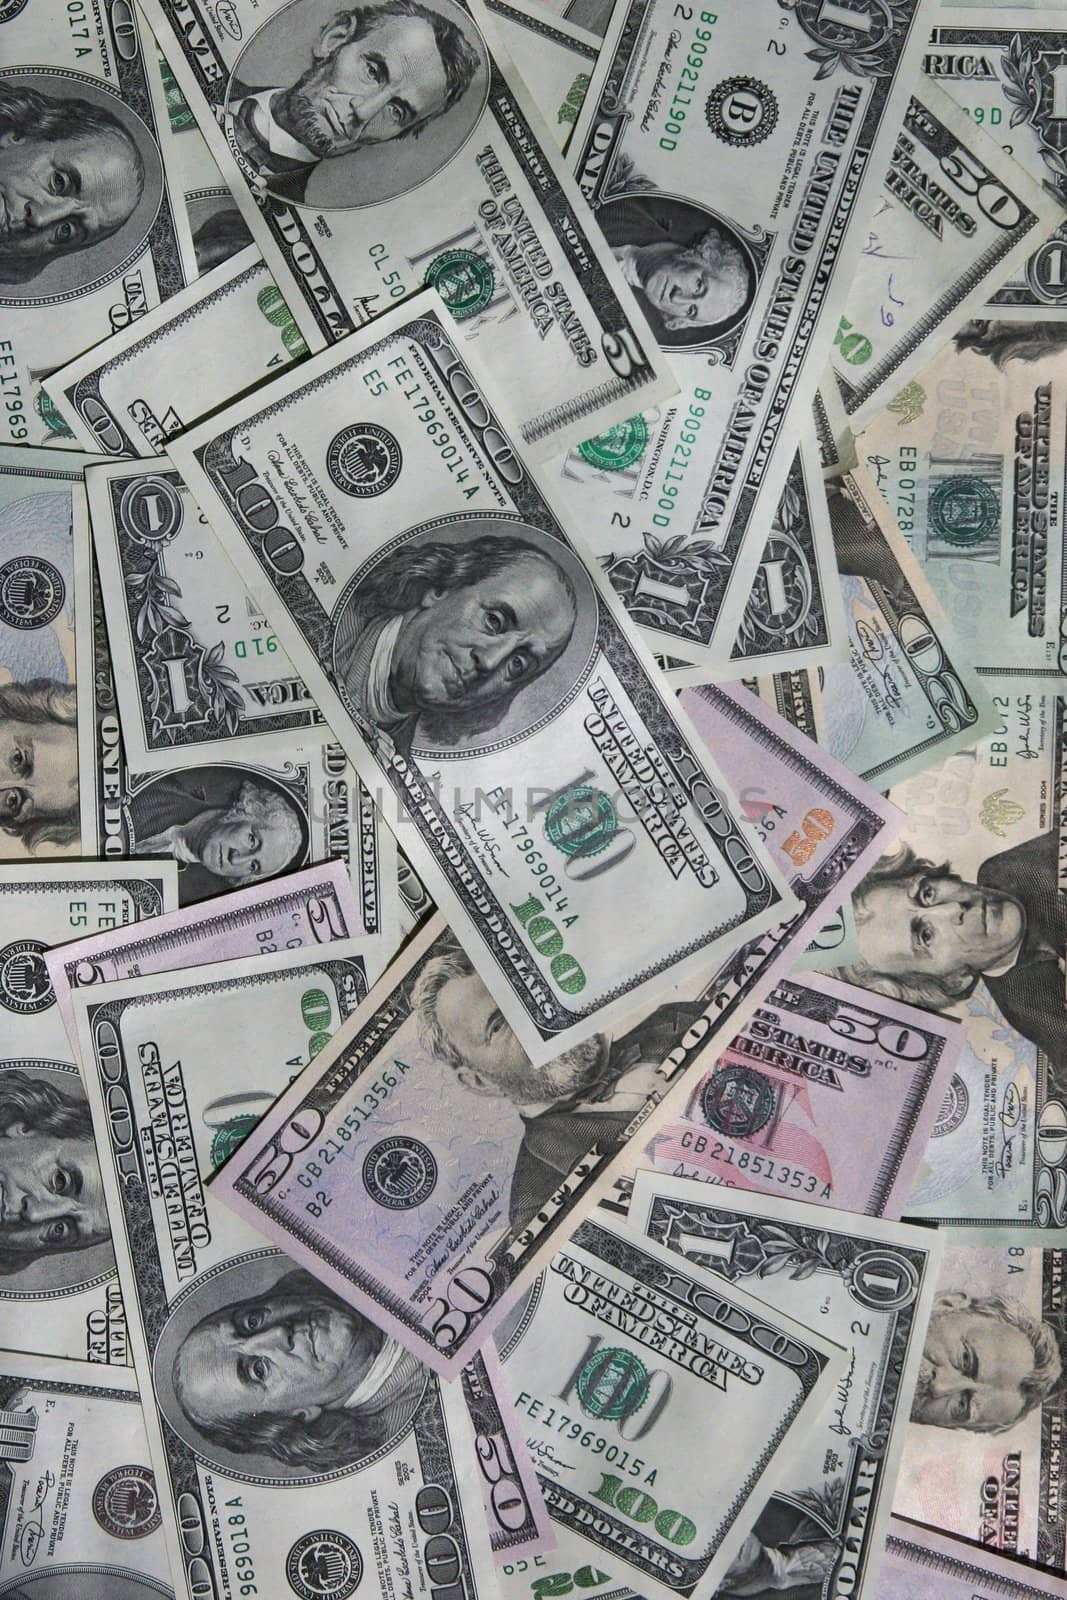 Background image of dollar bills covering the whole frame